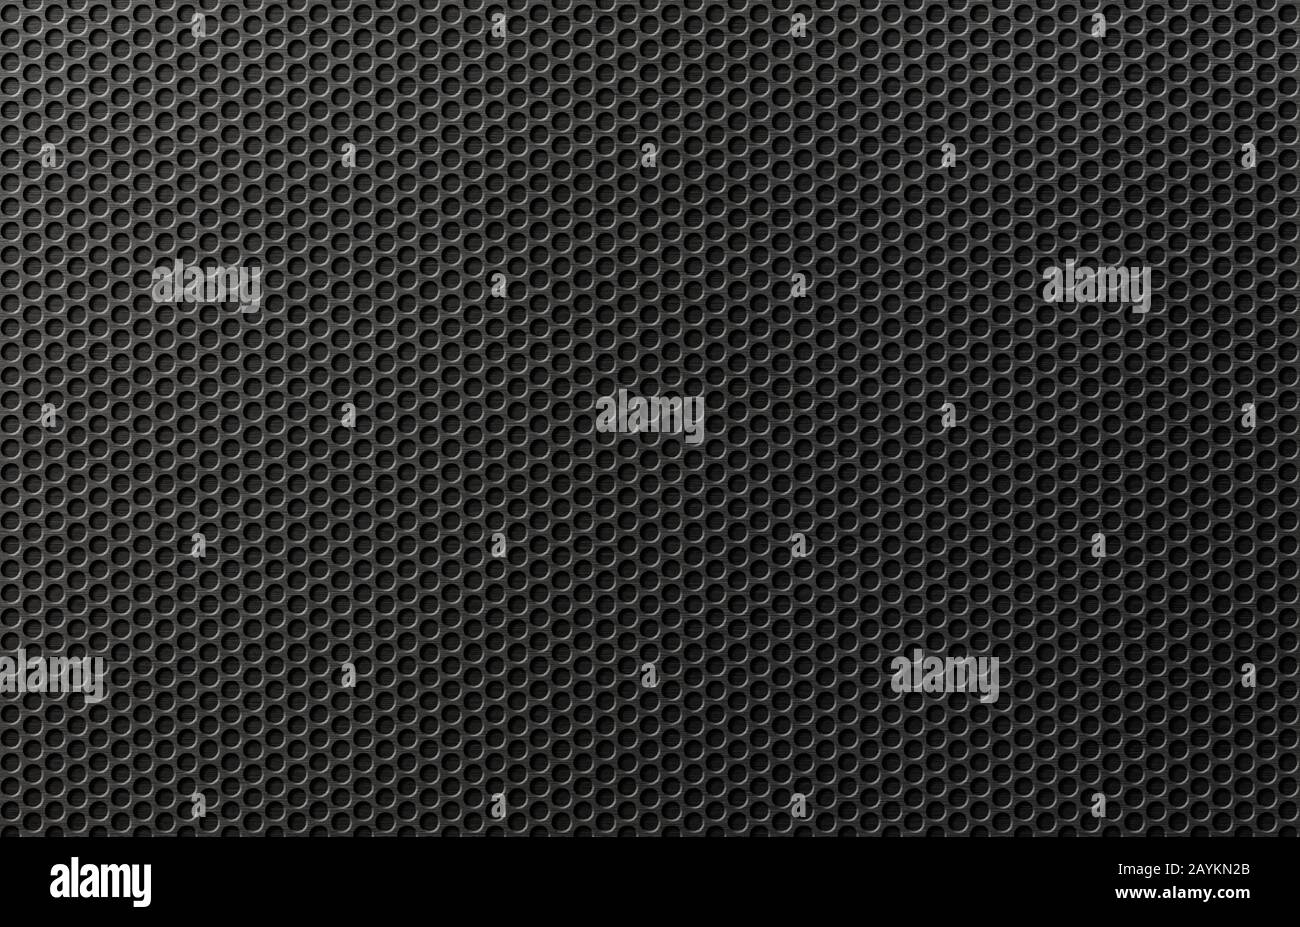 Black metal perforated grid background 3d illustration Stock Photo